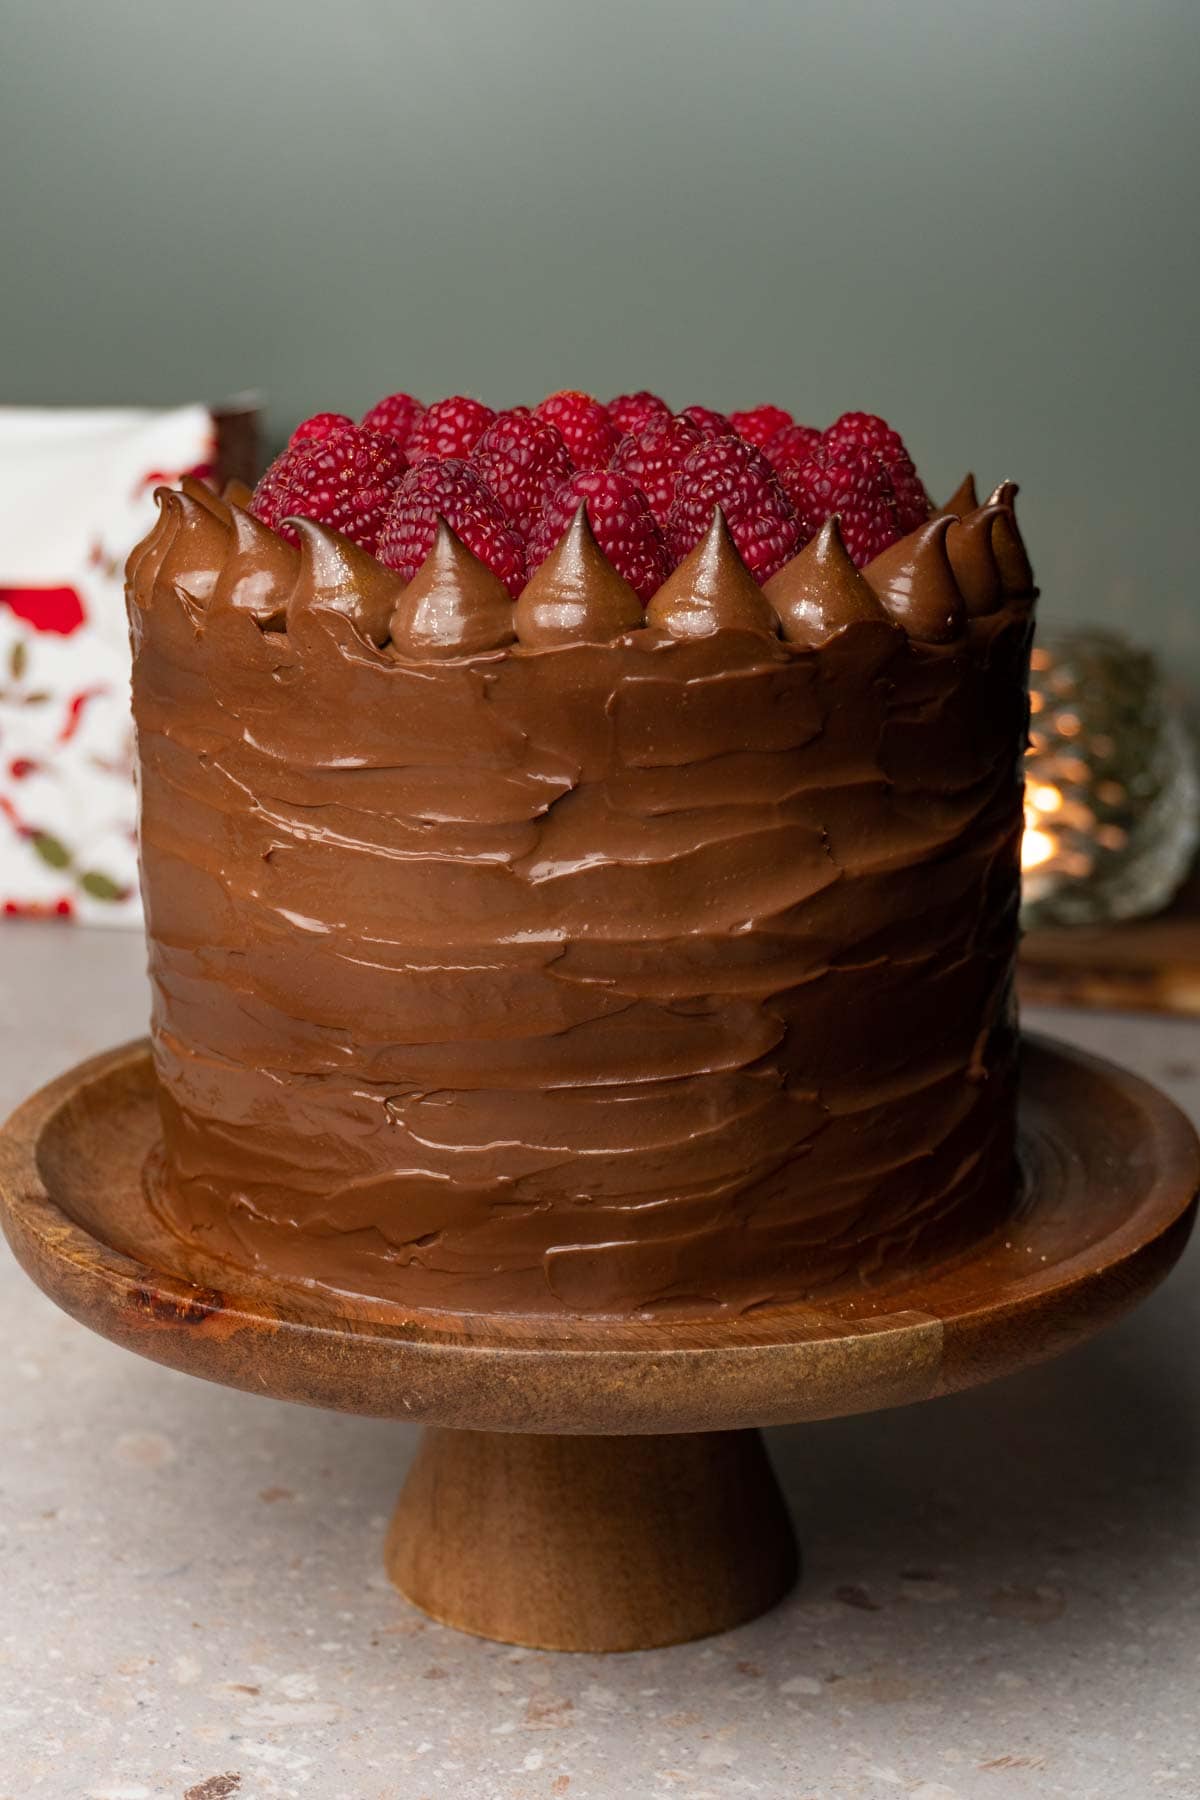 A rustic-looking chocolate cake on a wooden plate covered with silky chocolate cream and decorated with fresh raspberries.